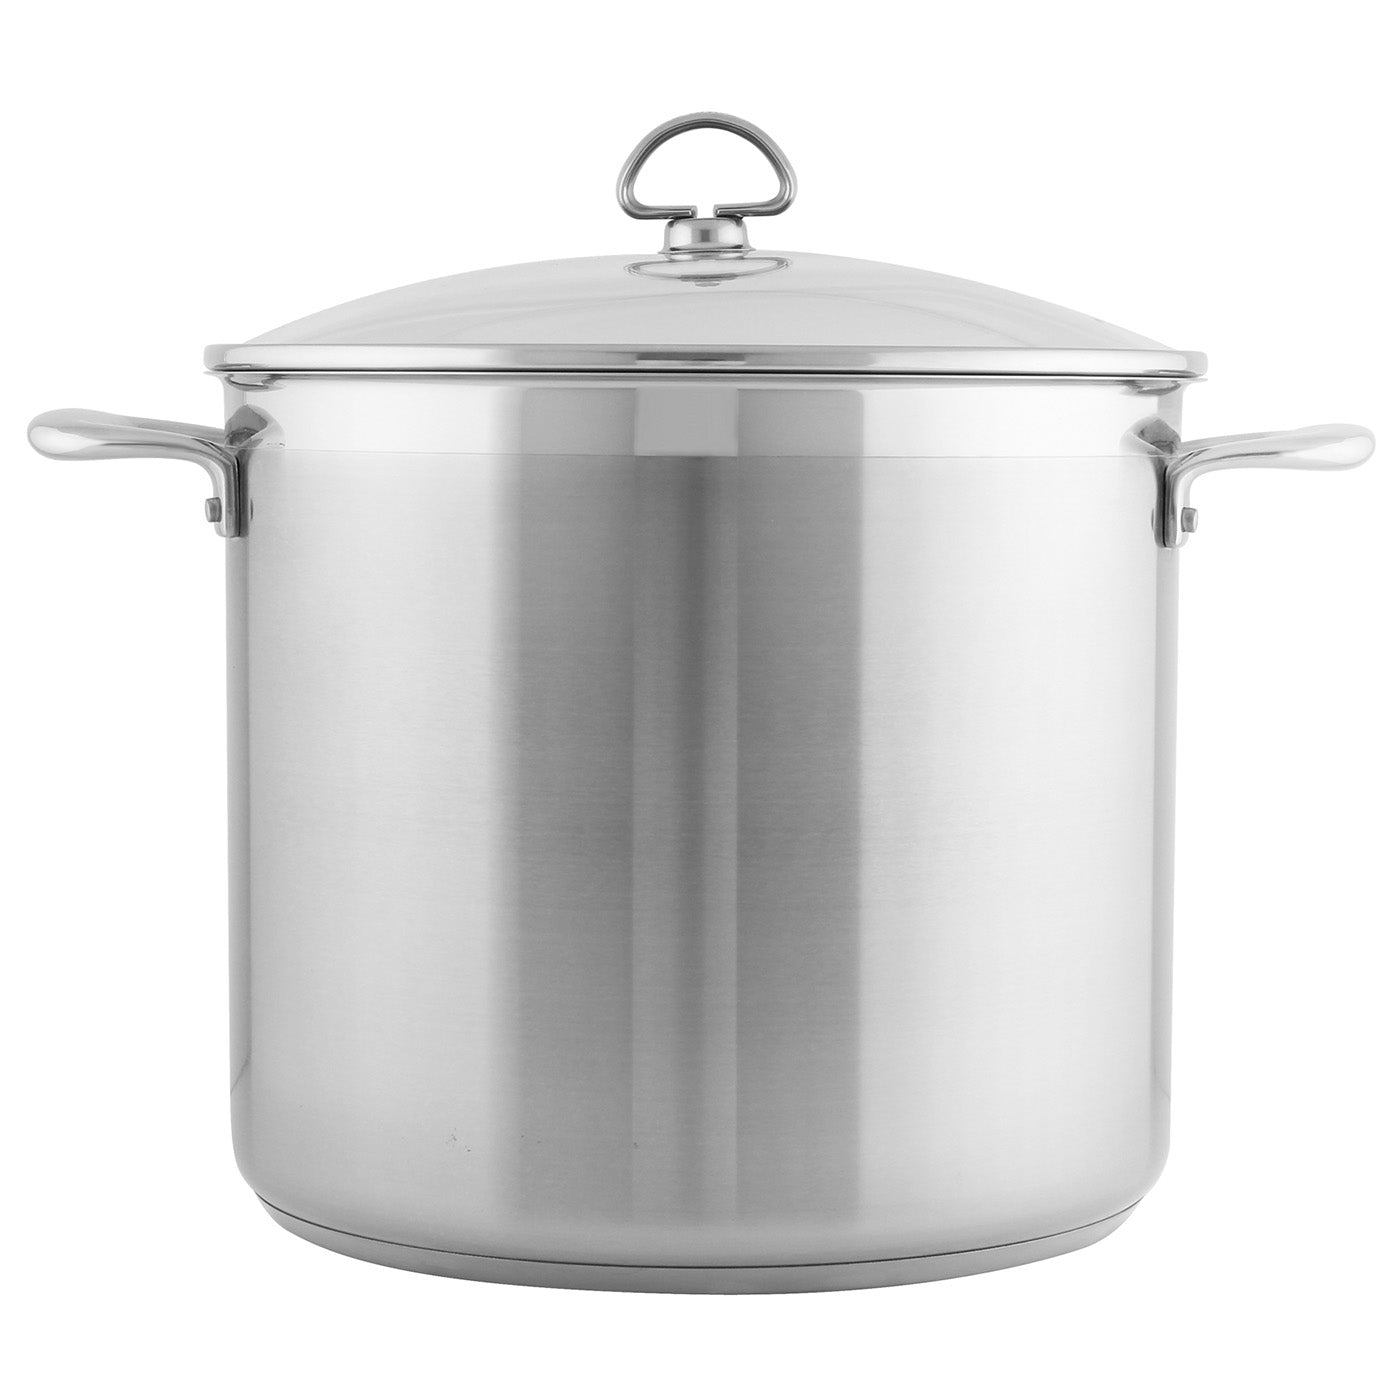 Induction 21 Steel Stockpot with Lid (12 Qt.) CHANTAL